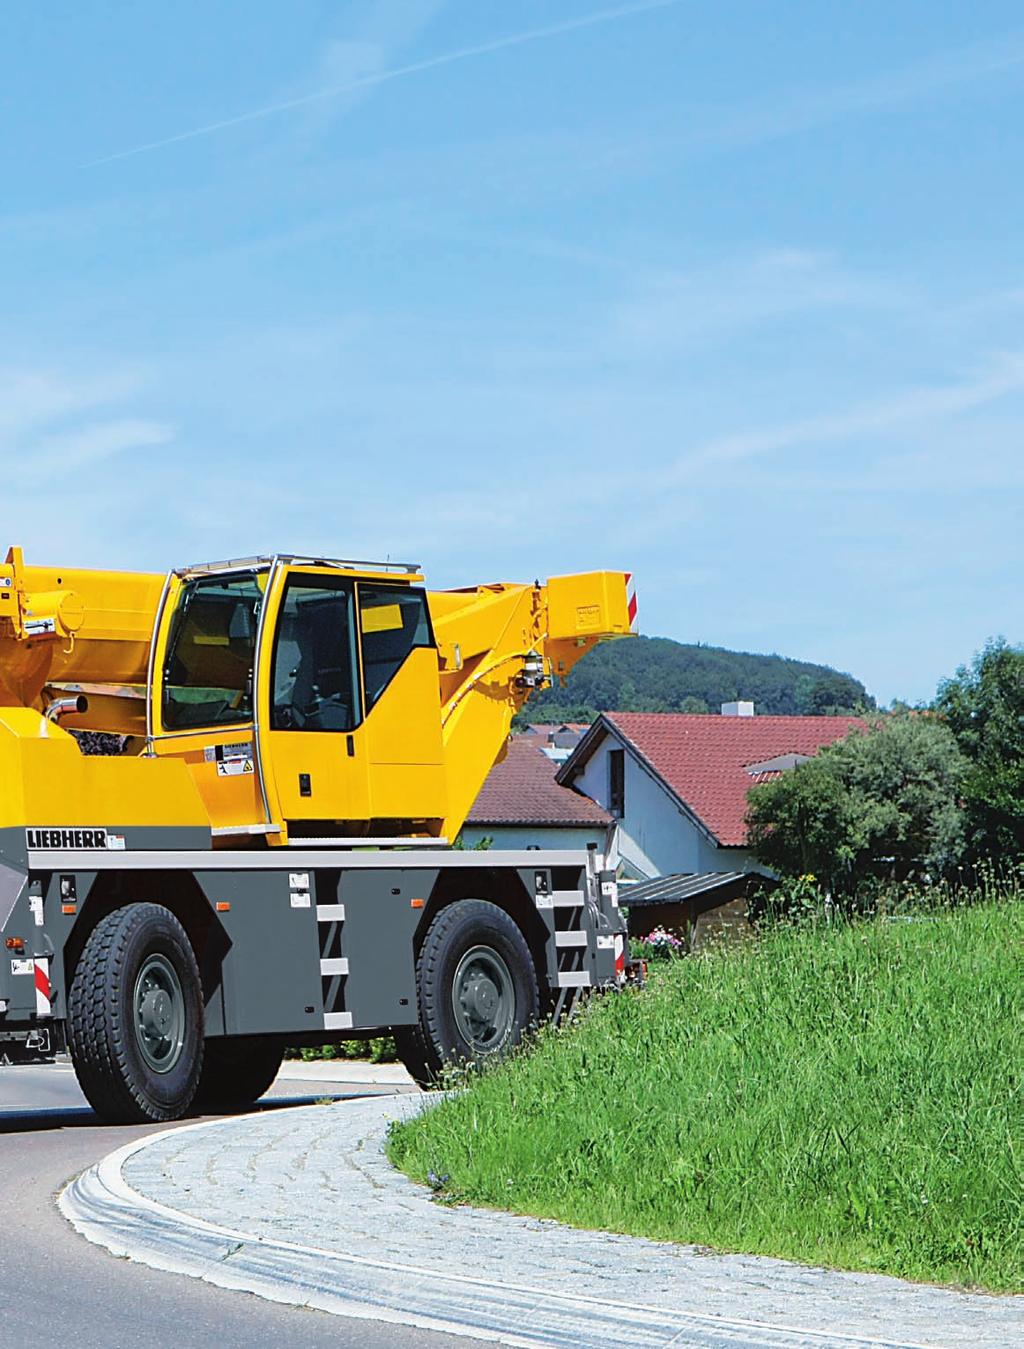 A long telescopic boom, high capacities, an extraordinary mobility as well as a comprehensive comfort and safety configuration marks the mobile crane LTM 1040-2.1 from Liebherr.